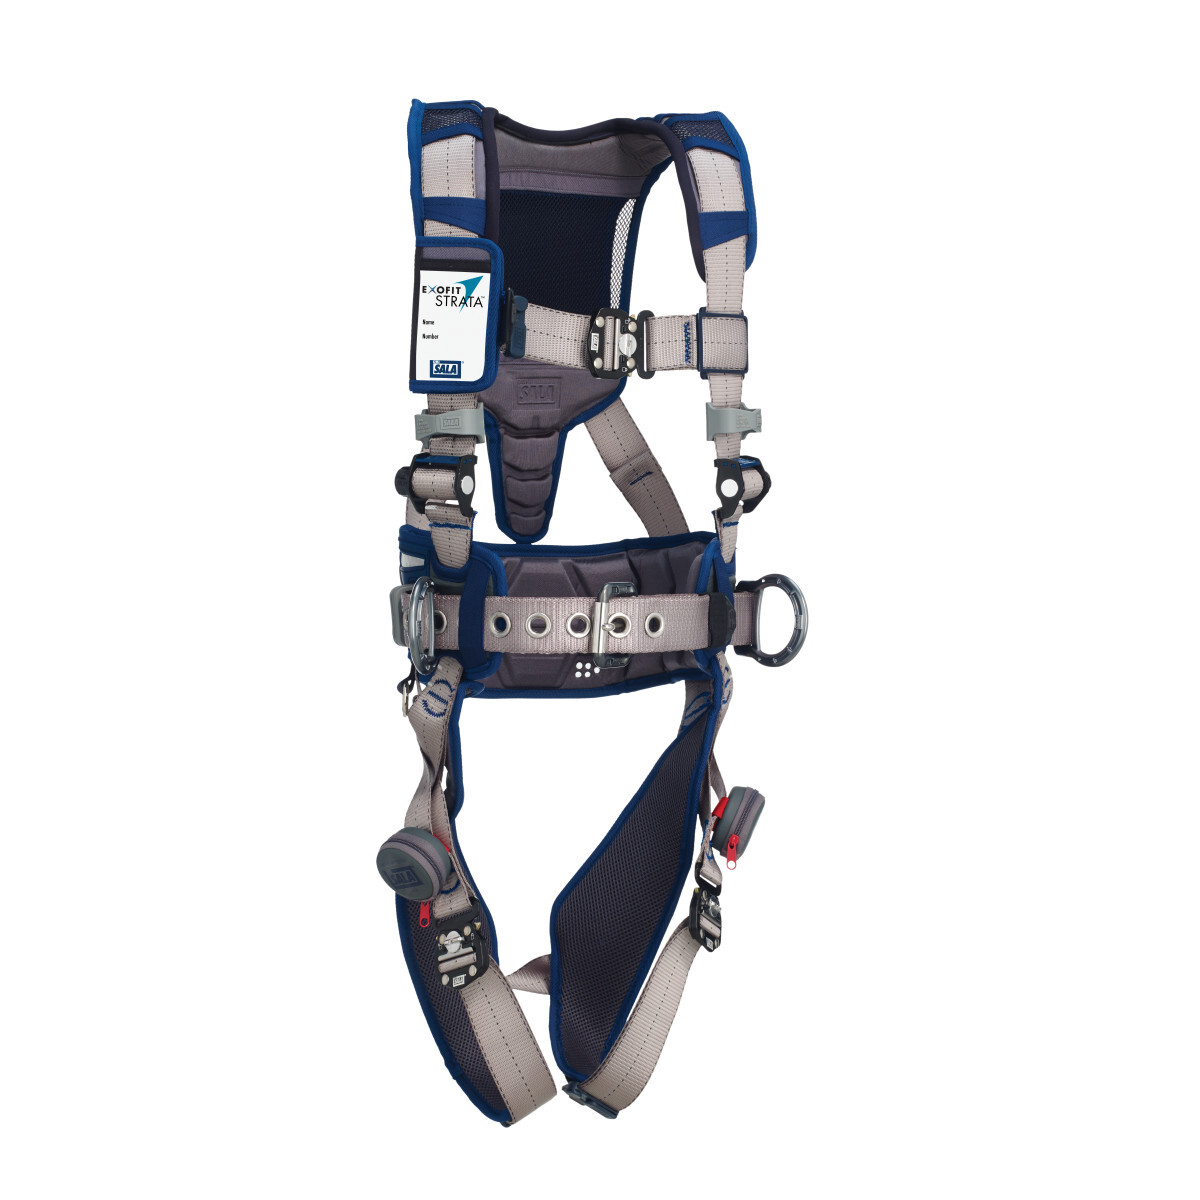 3M™ DBI-SALA® Large ExoFit STRATA™ Construction Style Harness With Aluminum Back And Side D-rings, Duo-Lok™ Quik Connect Buckles